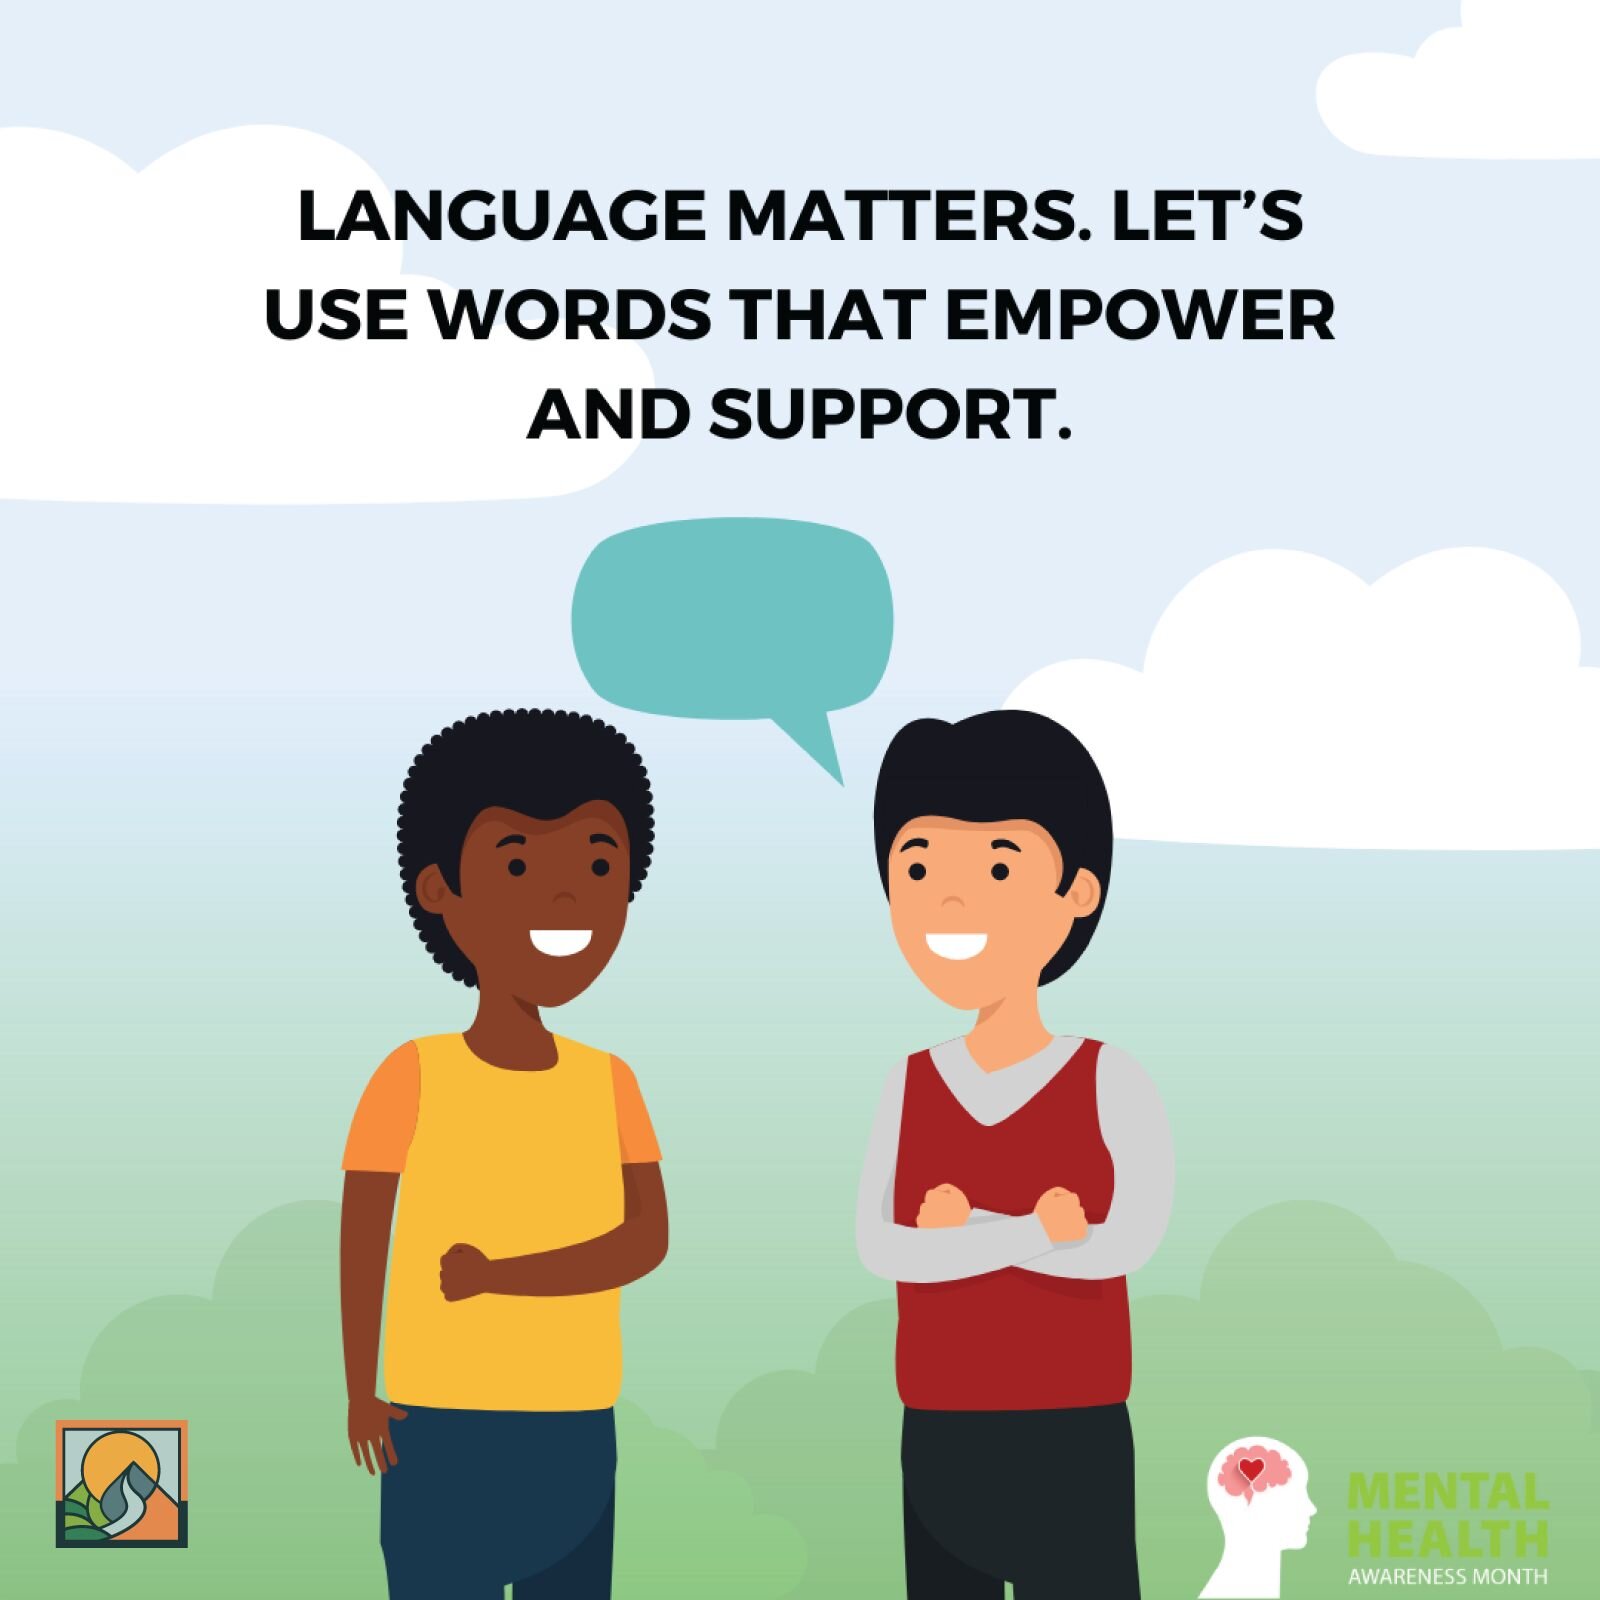 It can be hard to talk about mental health. Get tips on starting the conversation with your friends, loved ones and your community: samhsa.gov/mental-health/how-to-talk. #WordsMatter #Together4MH #MHAM2023